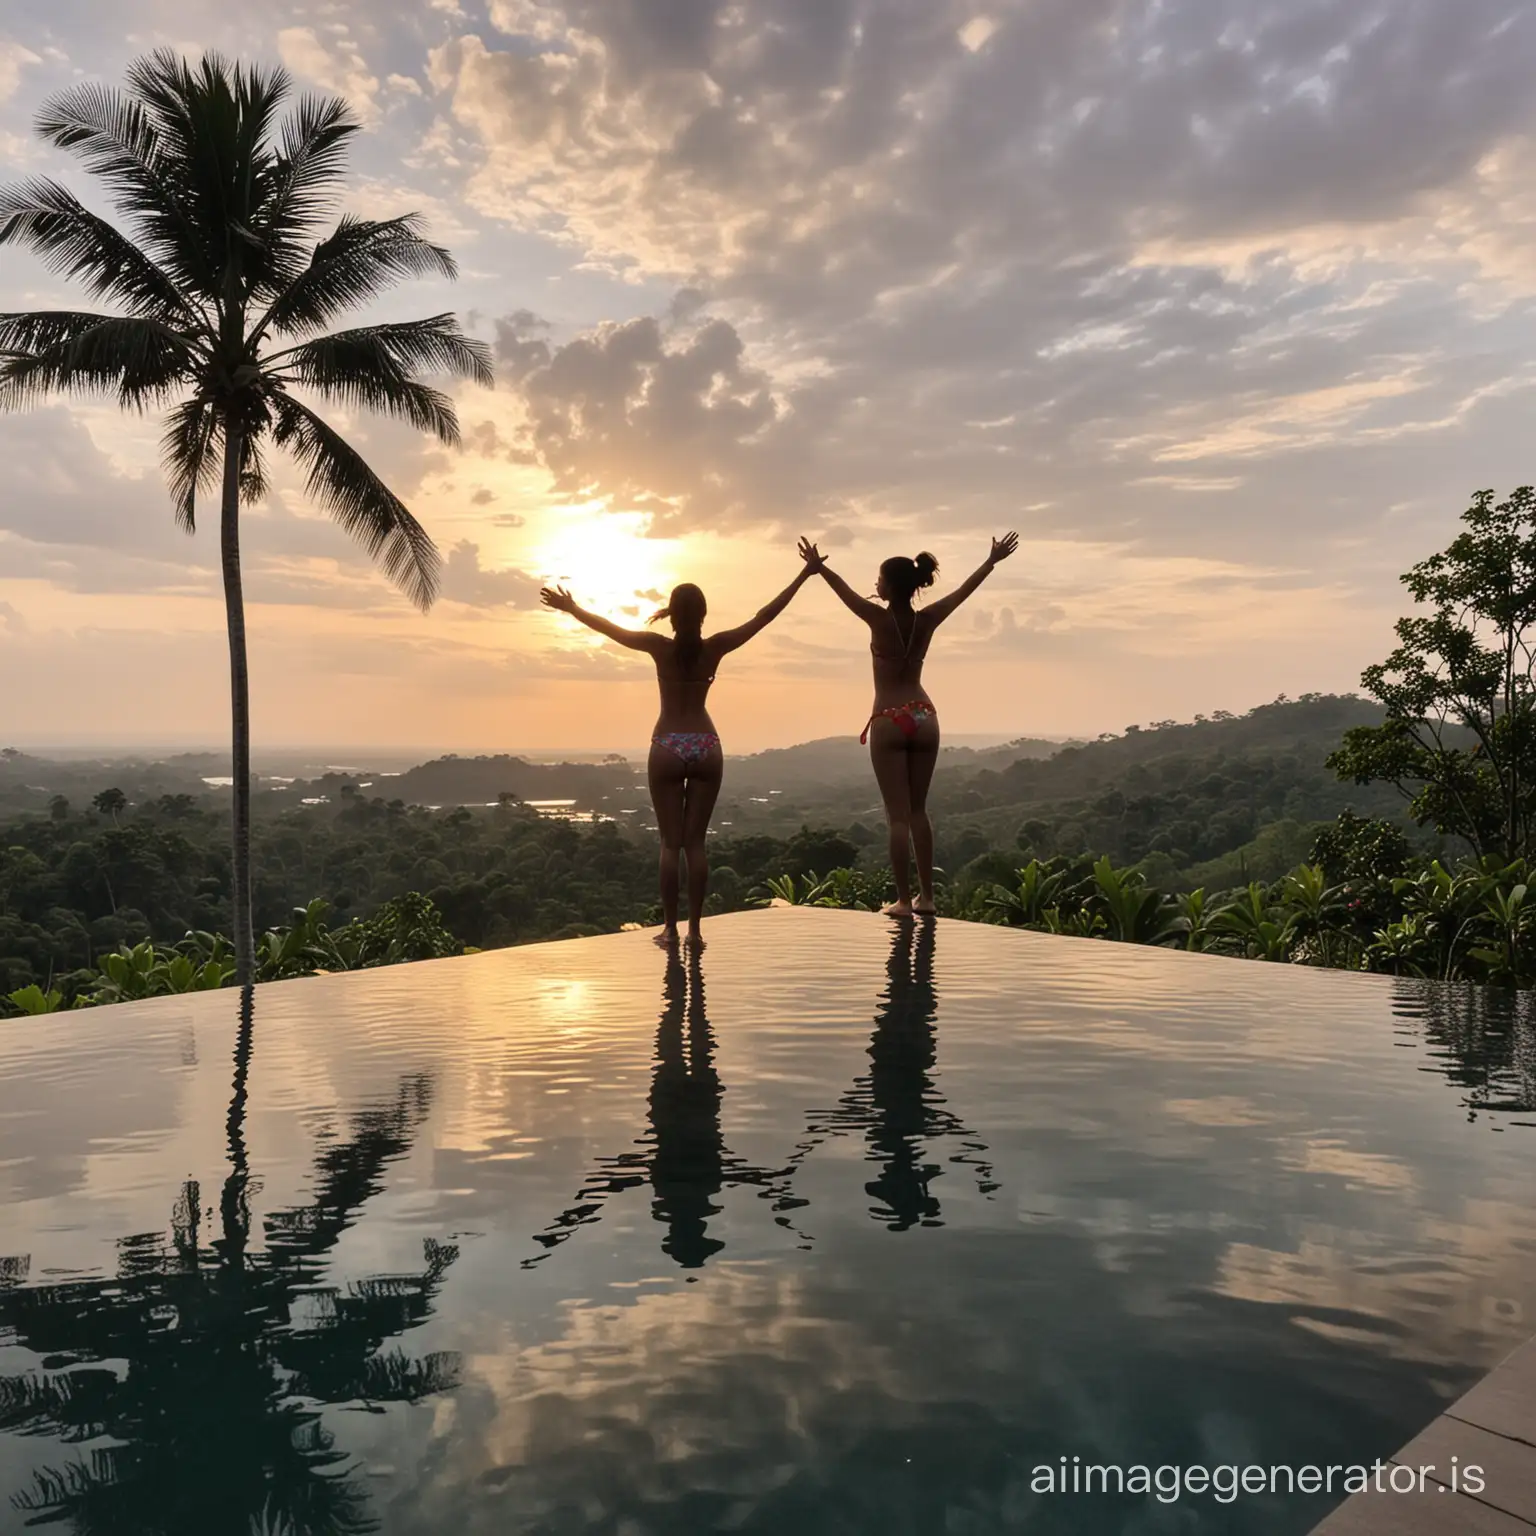 Sri-Lankan-Girls-Celebrate-Vacation-Near-Up-Country-at-Luxury-Infinity-Pool-During-Sunset